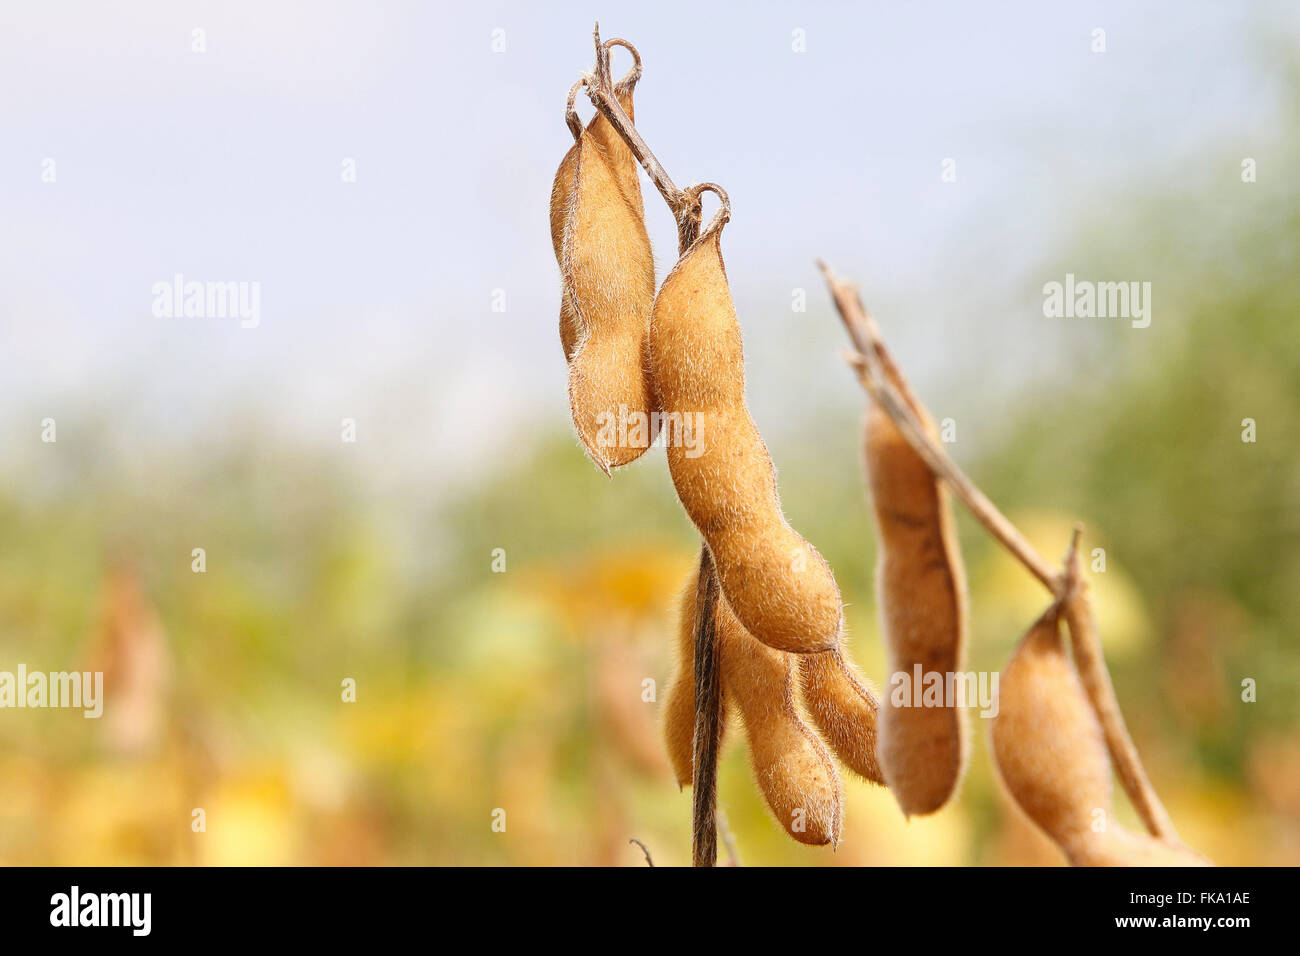 Detail of pods of soybean plantation Stock Photo